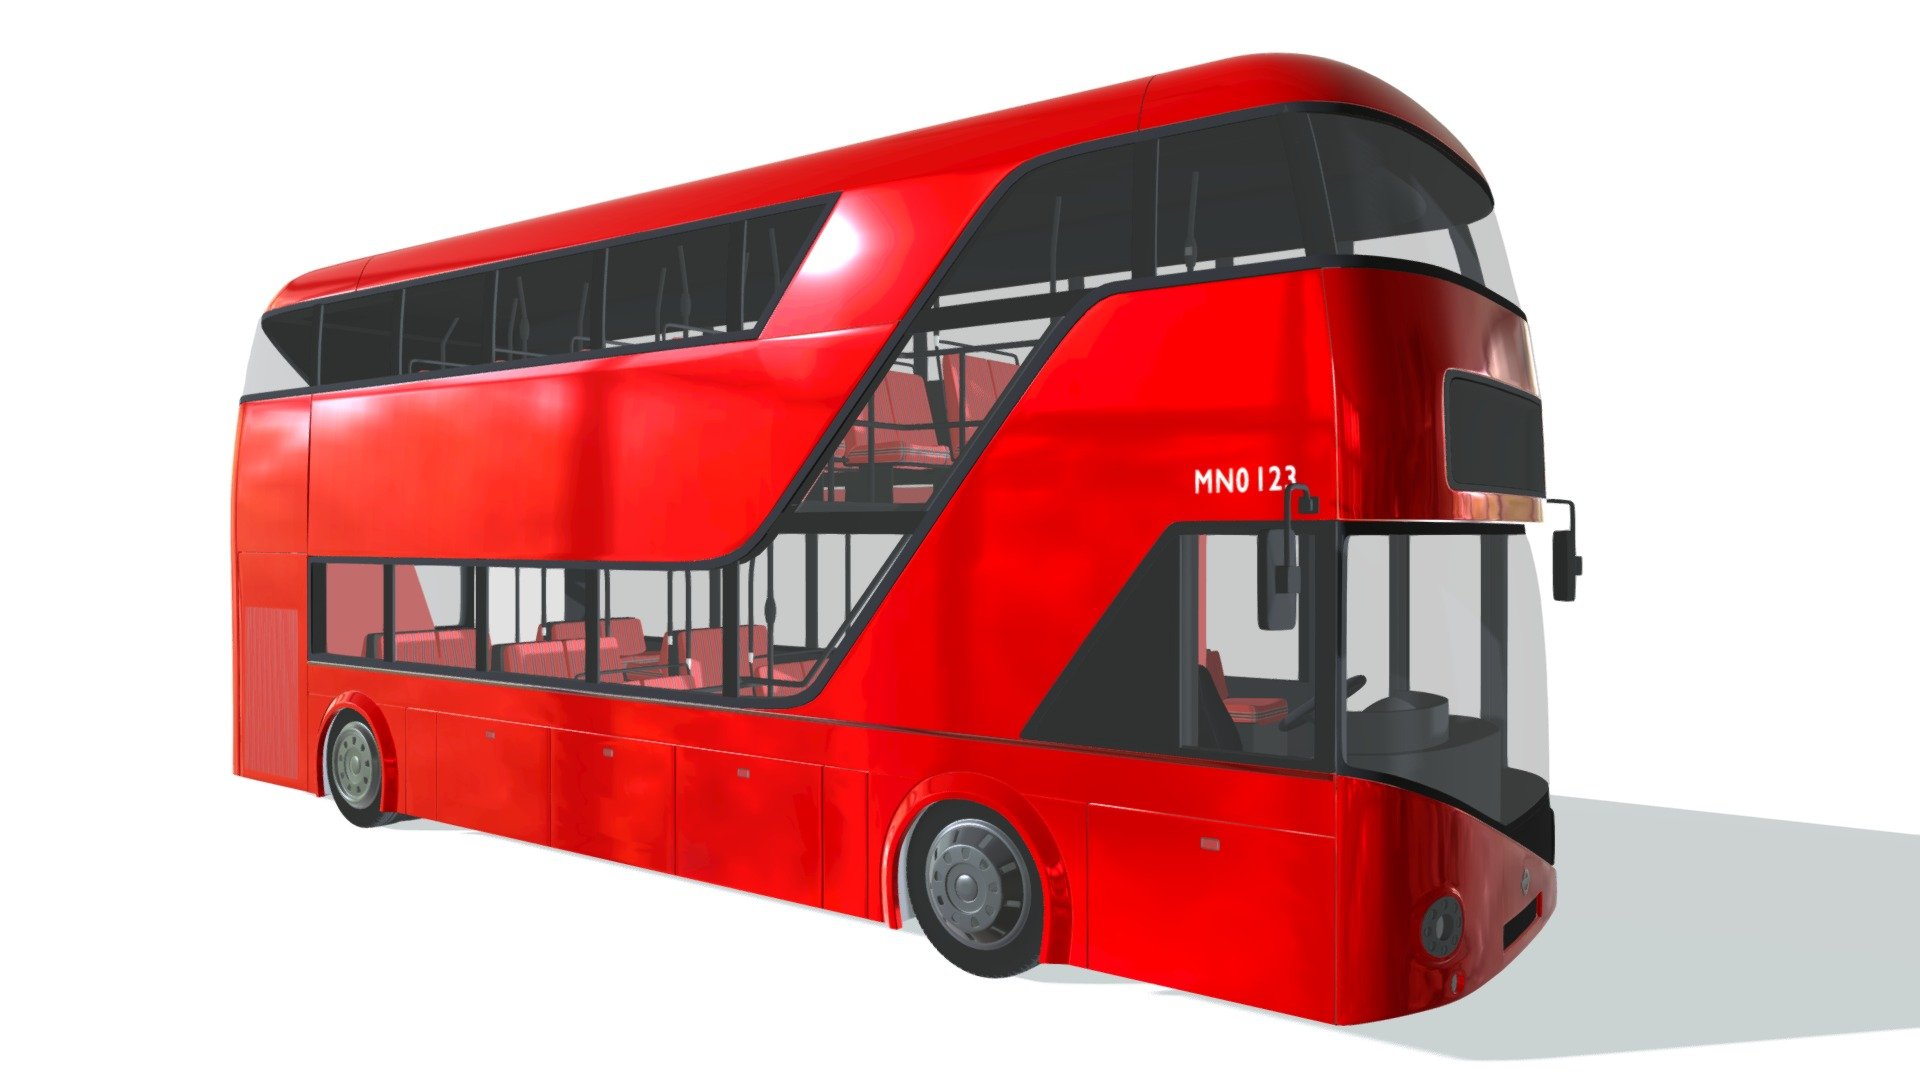 Detailed 3d model of London double decker bus with detailed interior.

Included Formats:

3ds Max

3D Studio

Lightwave

OBJ

Softimage - London Double-decker Bus - Buy Royalty Free 3D model by 3DHorse 3d model